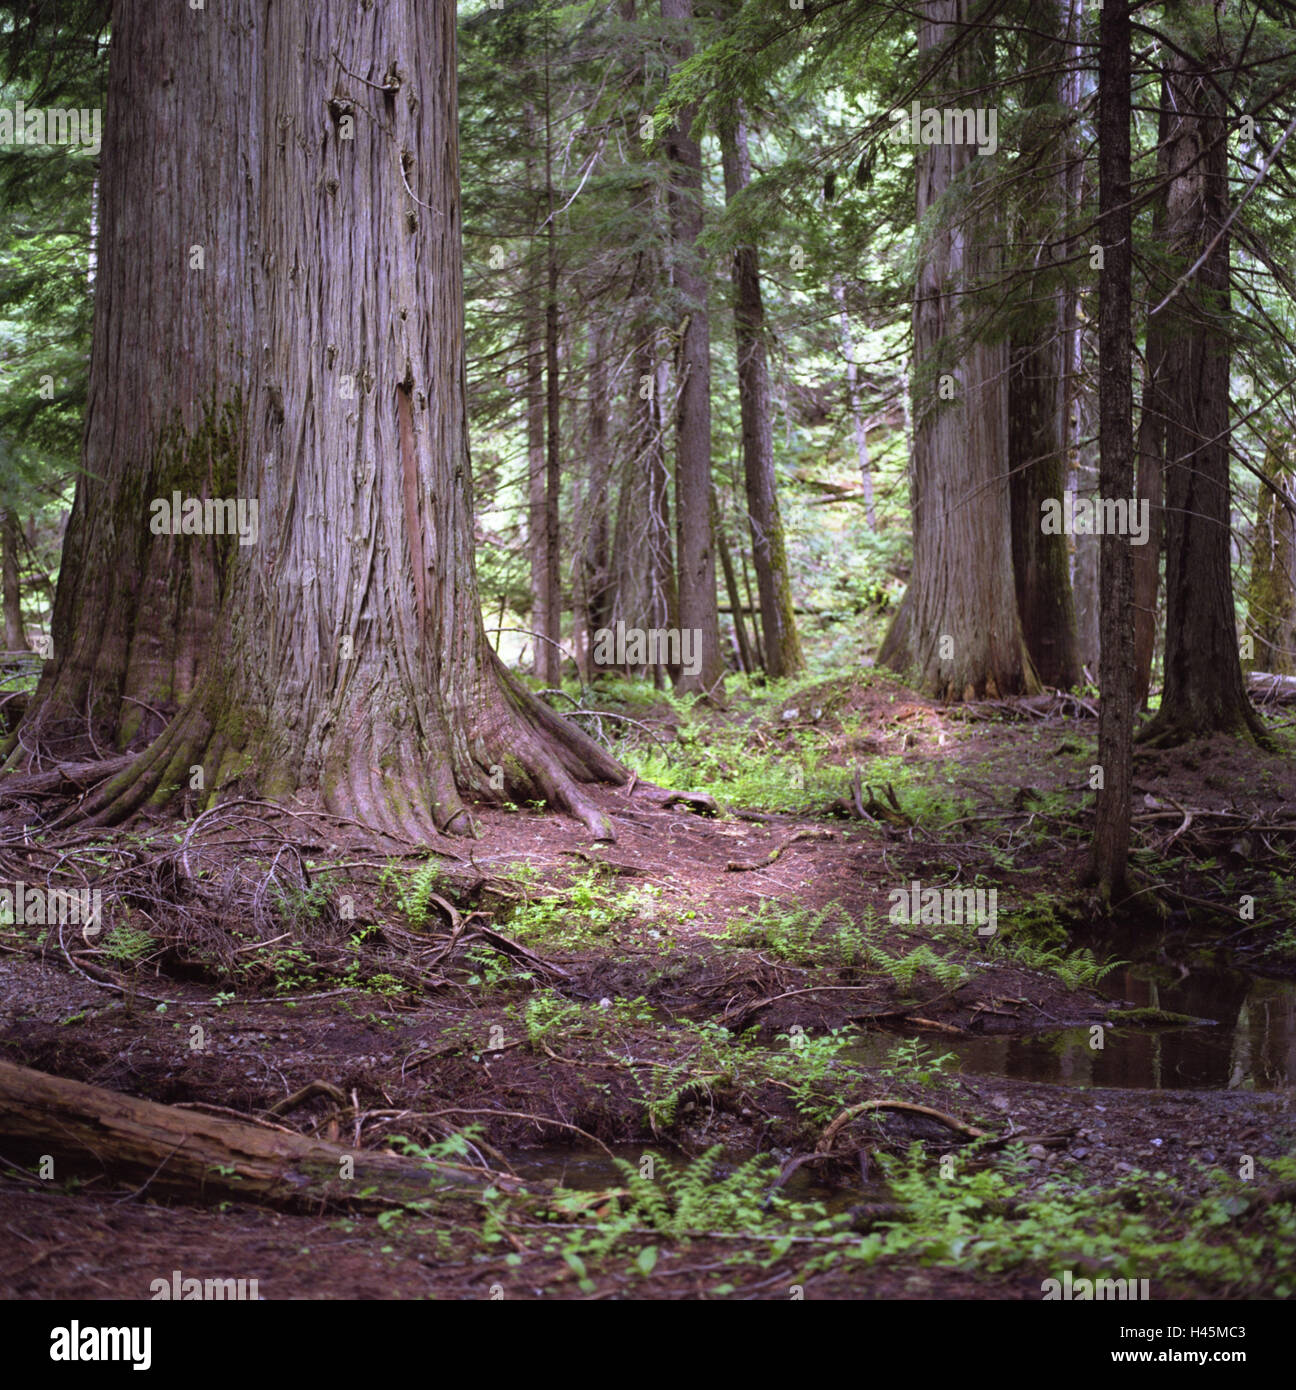 USA, Montana, Kootenai National Forest, forest, redwood, Kootenai National Forest, wilderness, plants, vegetation, conifers, cypress family, conifers, old, sequoias, logs, coniferous forest, forest, nature reserve, Redwood, trees, nobody, silence, humor, Stock Photo